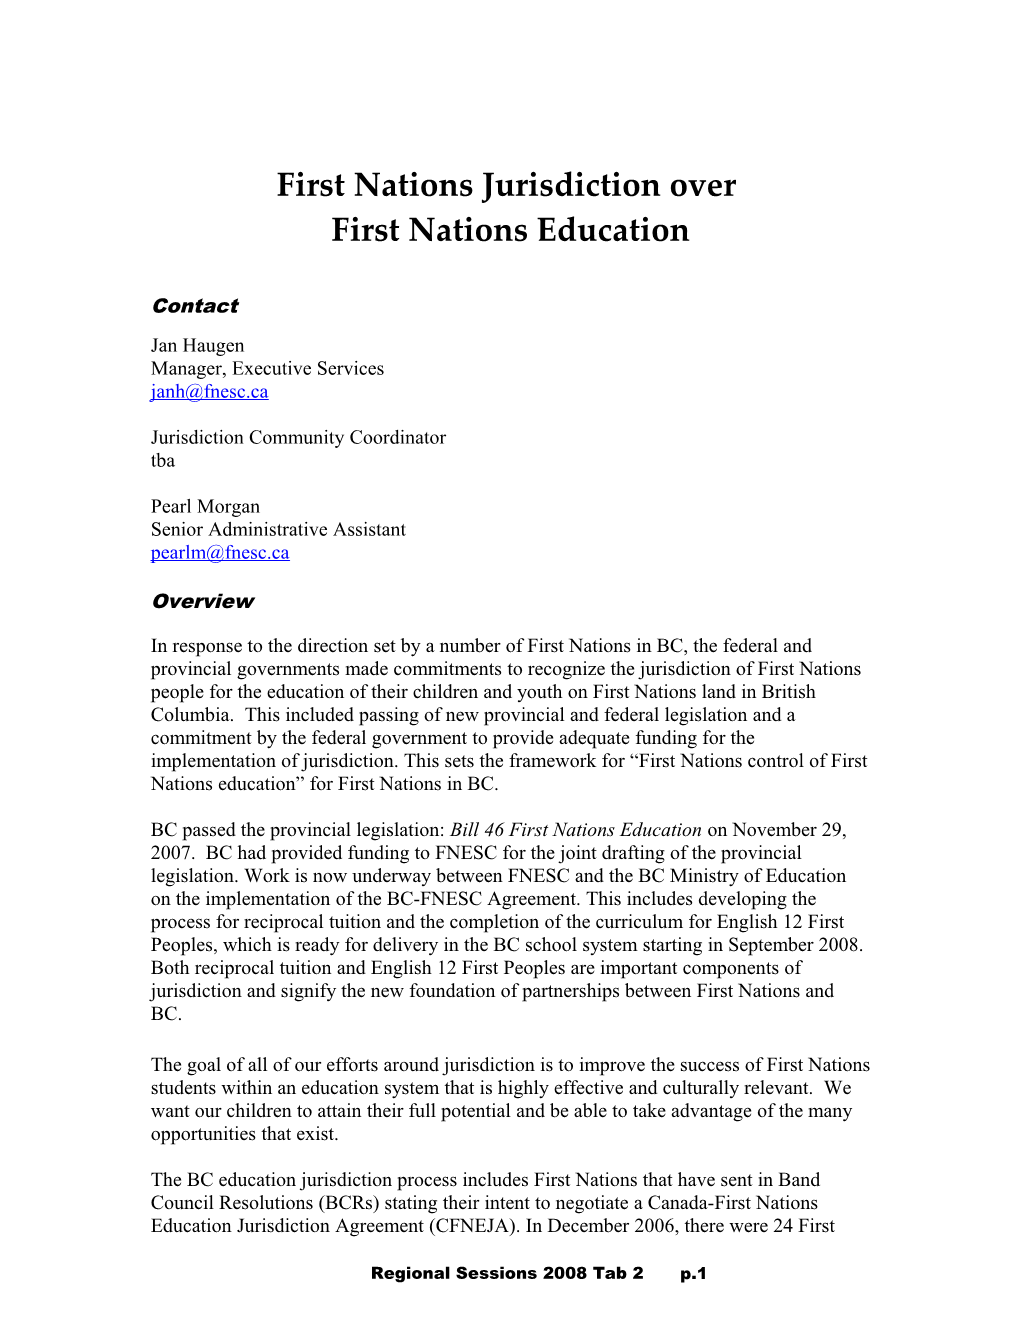 First Nations Jurisdiction Over First Nations Education